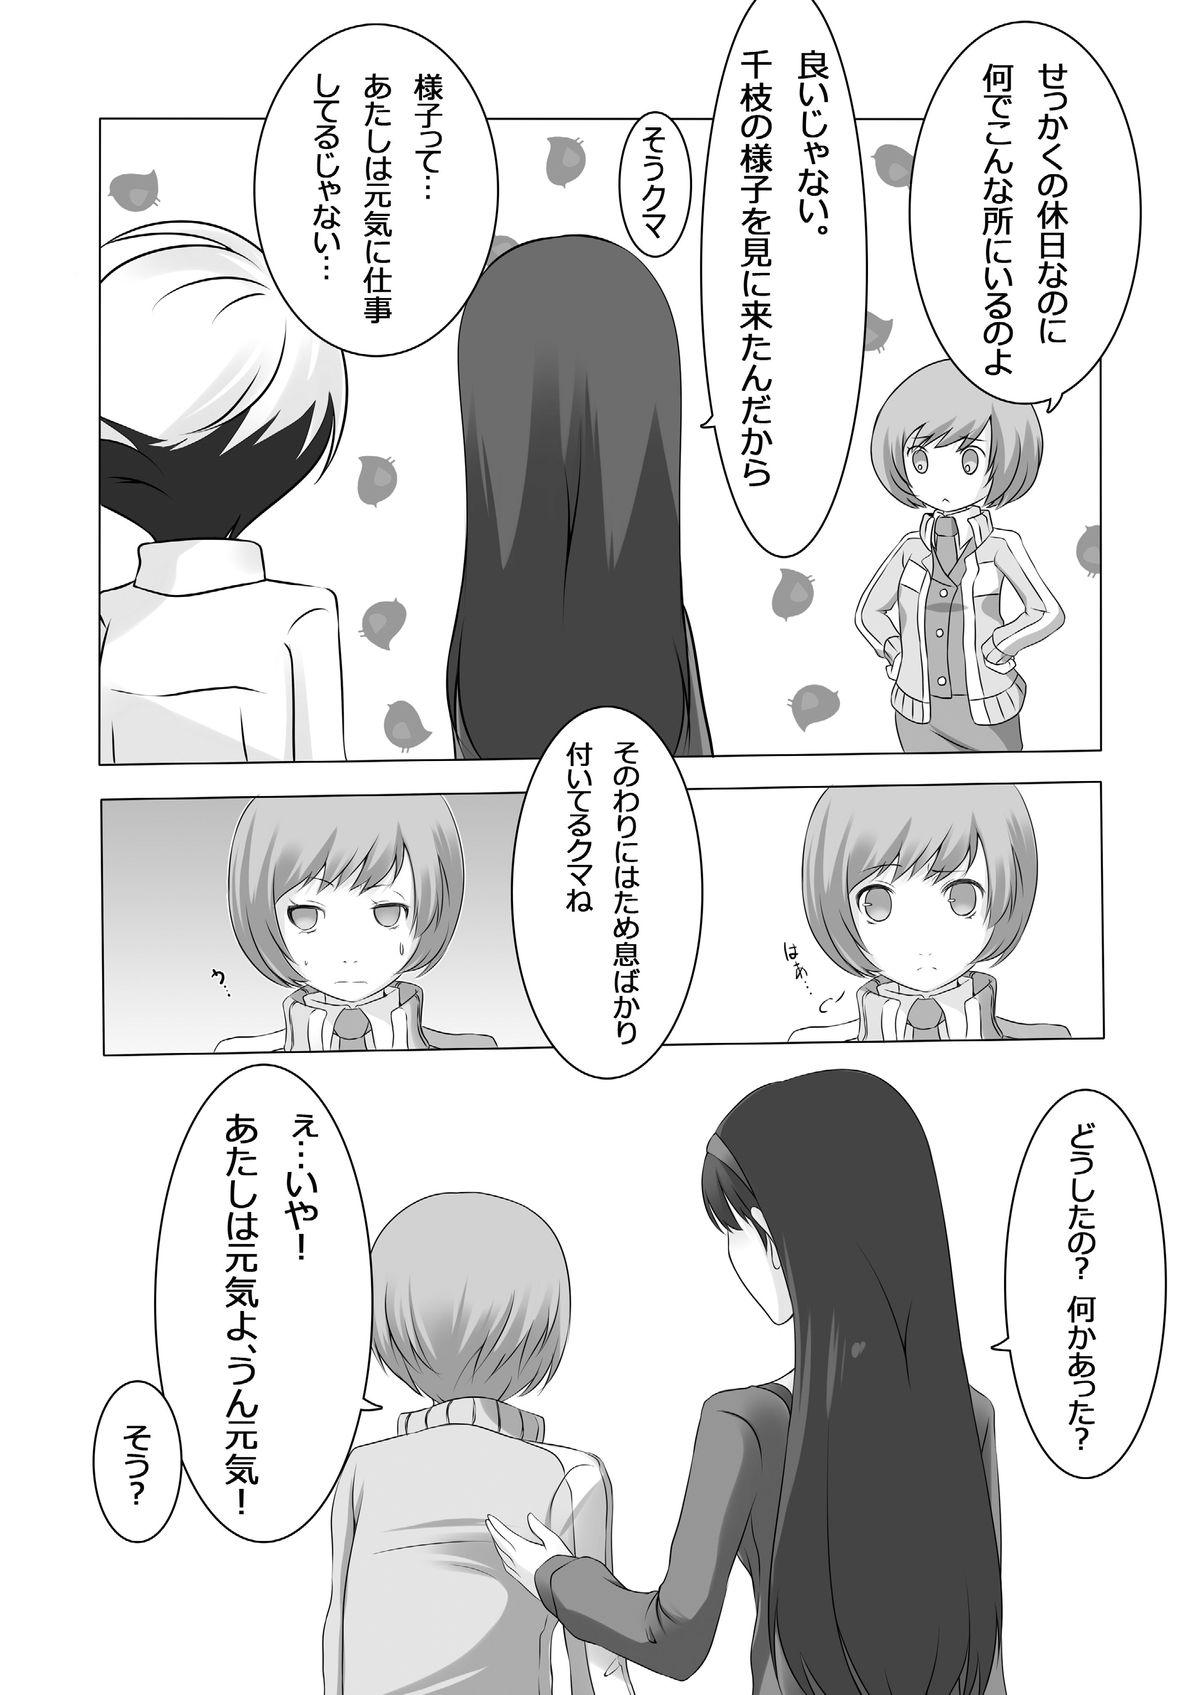 Olderwoman Persona 4: The Doujin #2 - Persona 4 Babes - Page 5